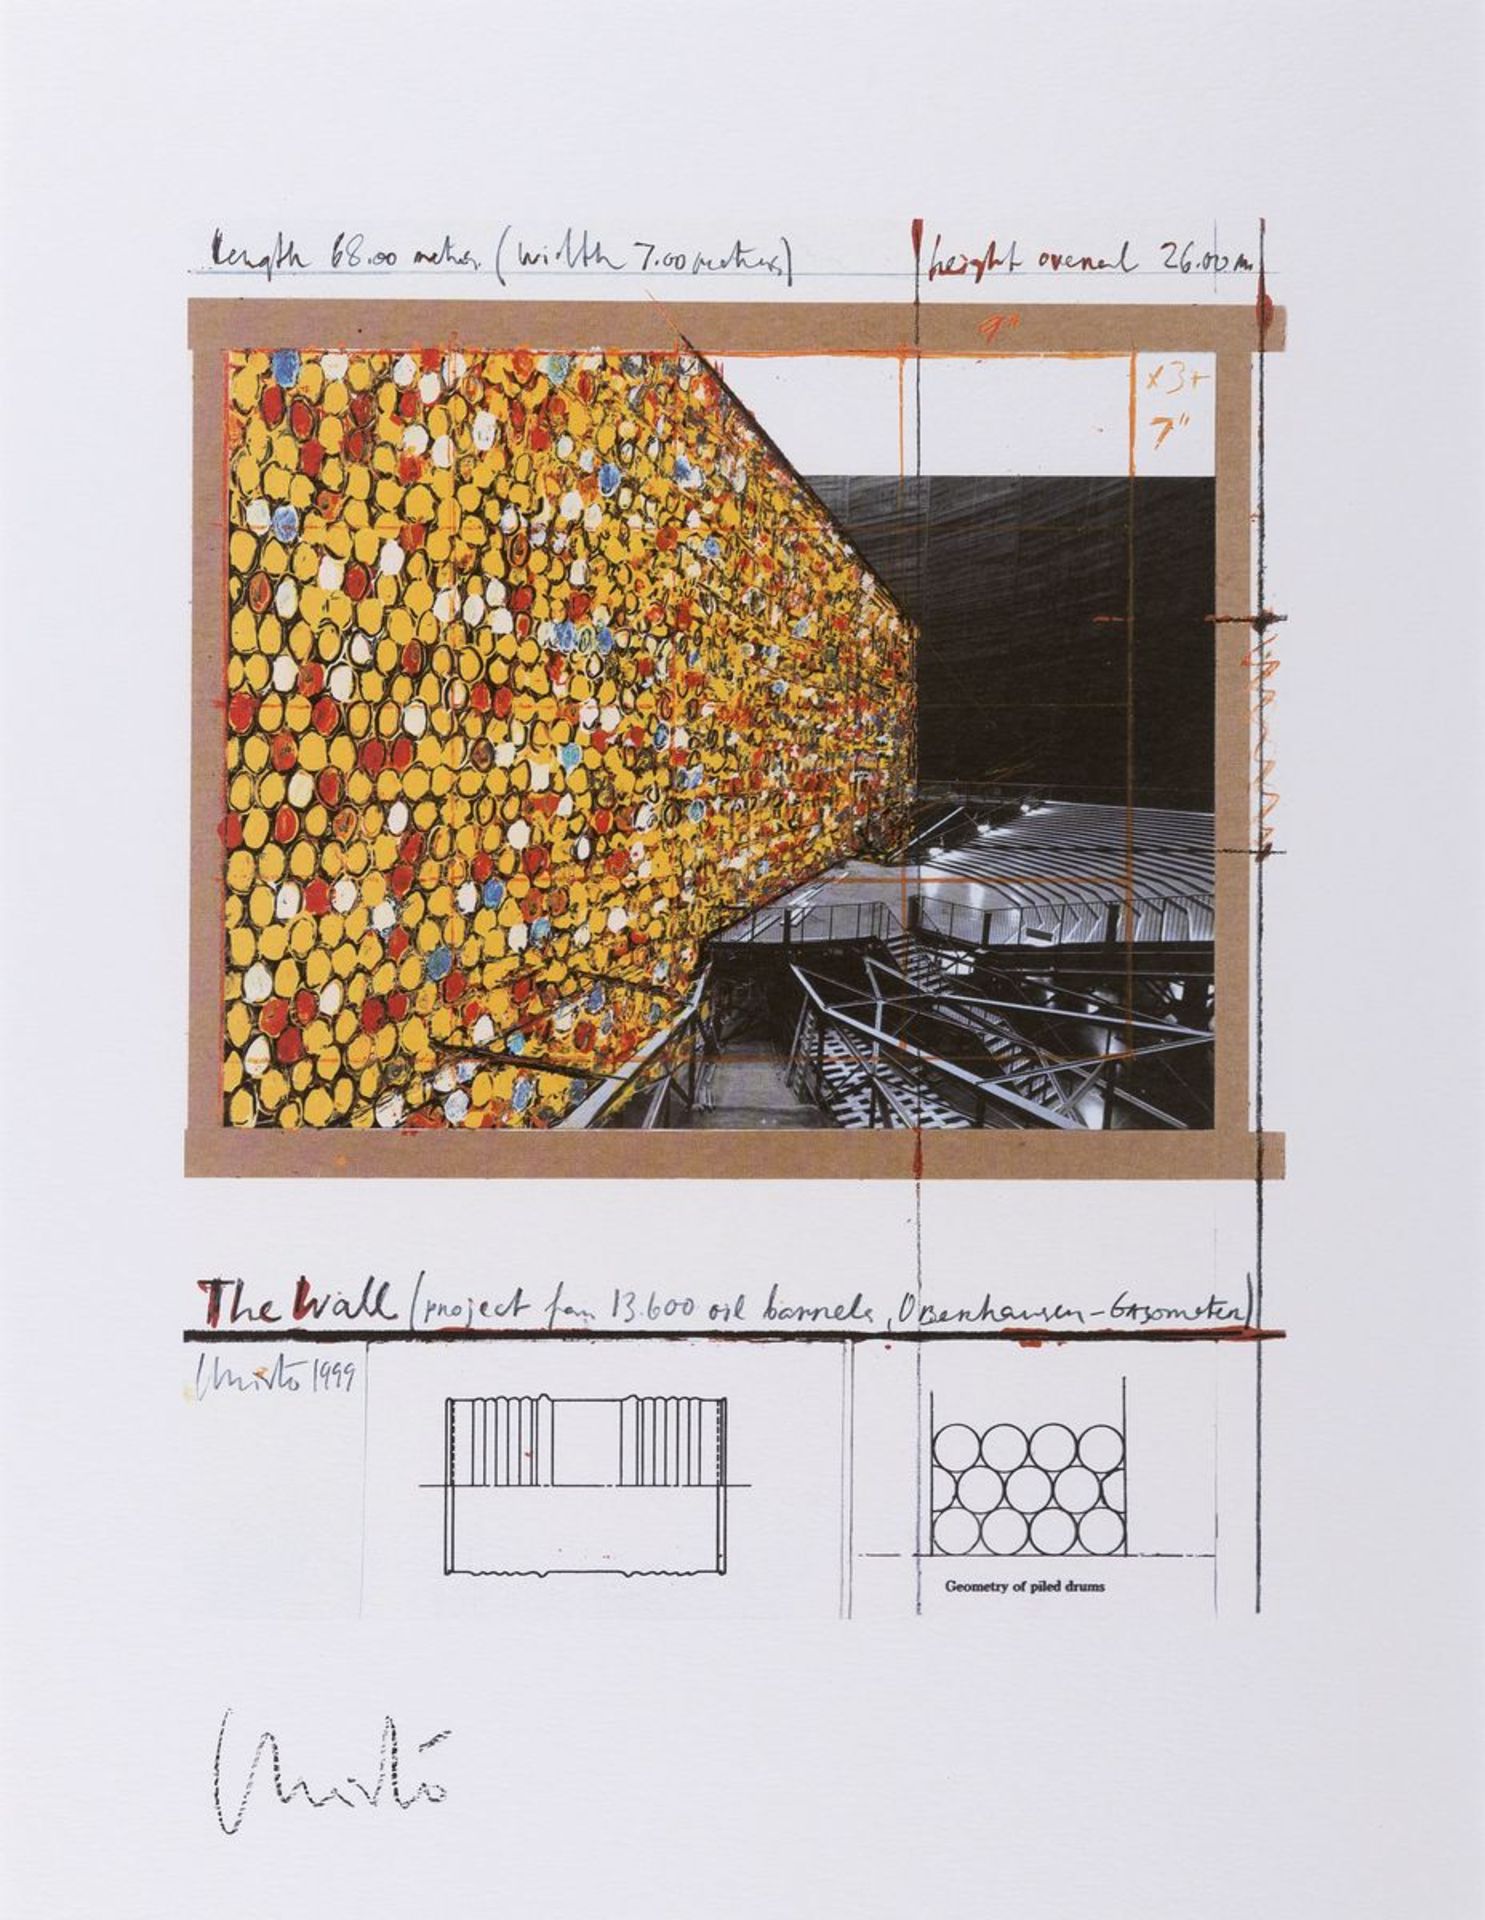 Christo, 1935-2020,  'The Wall-project for 13.600 oil